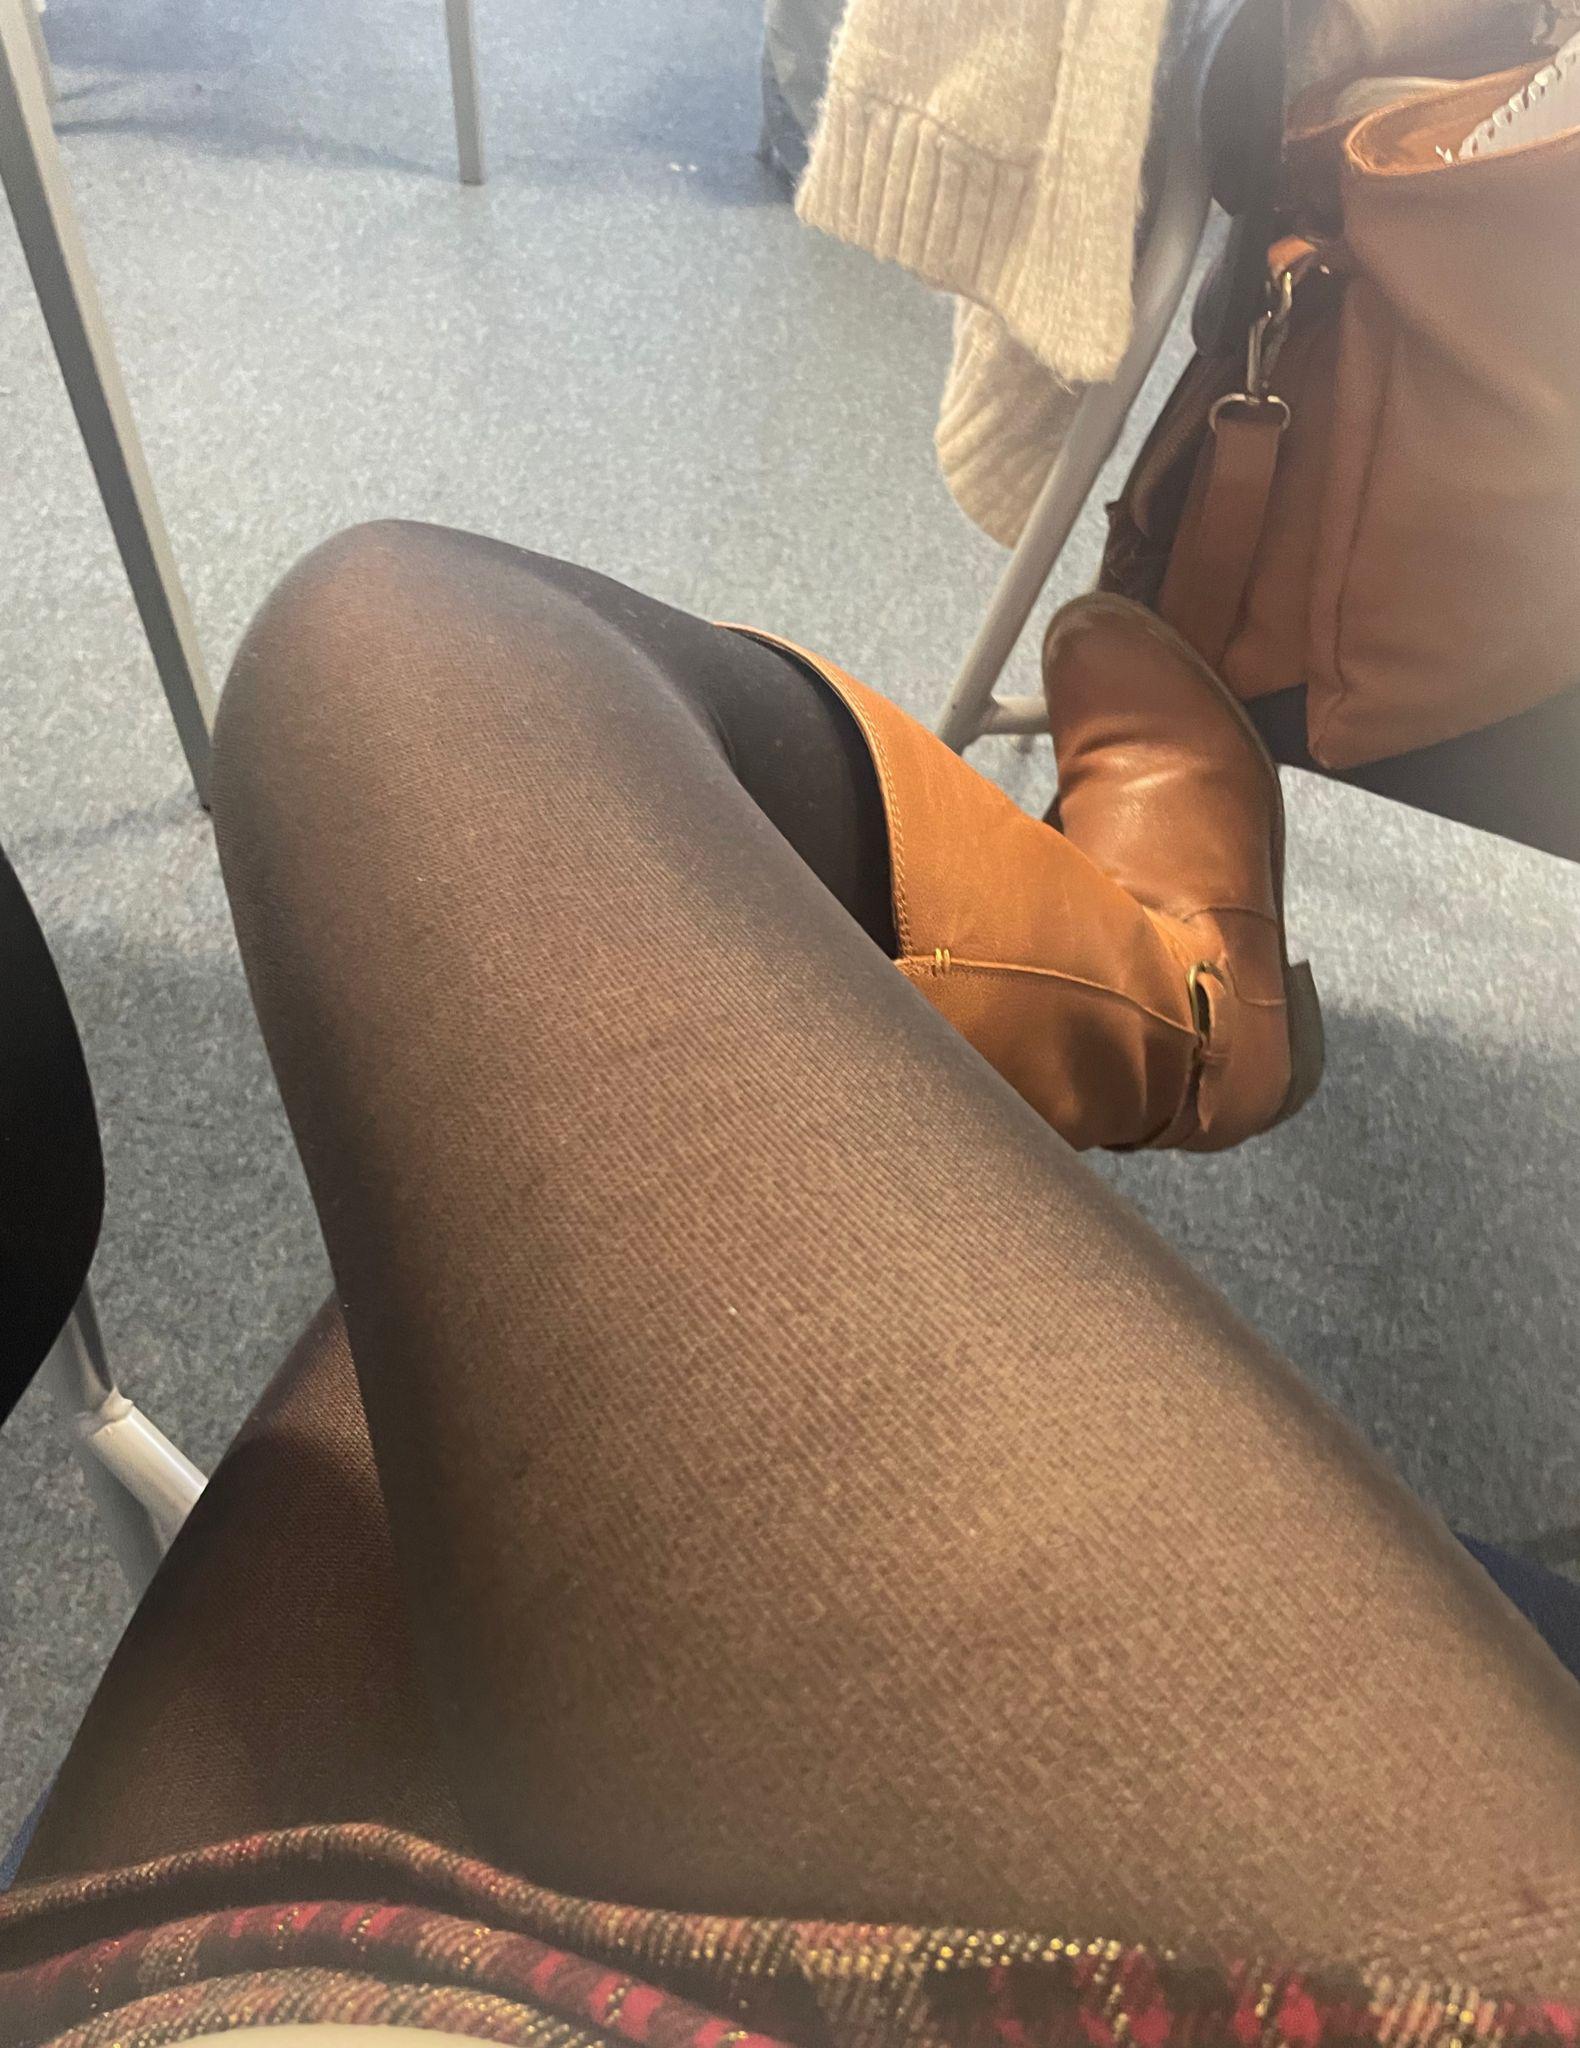 In class today, definitely got some looks when crossing my legs in this little skirt ?